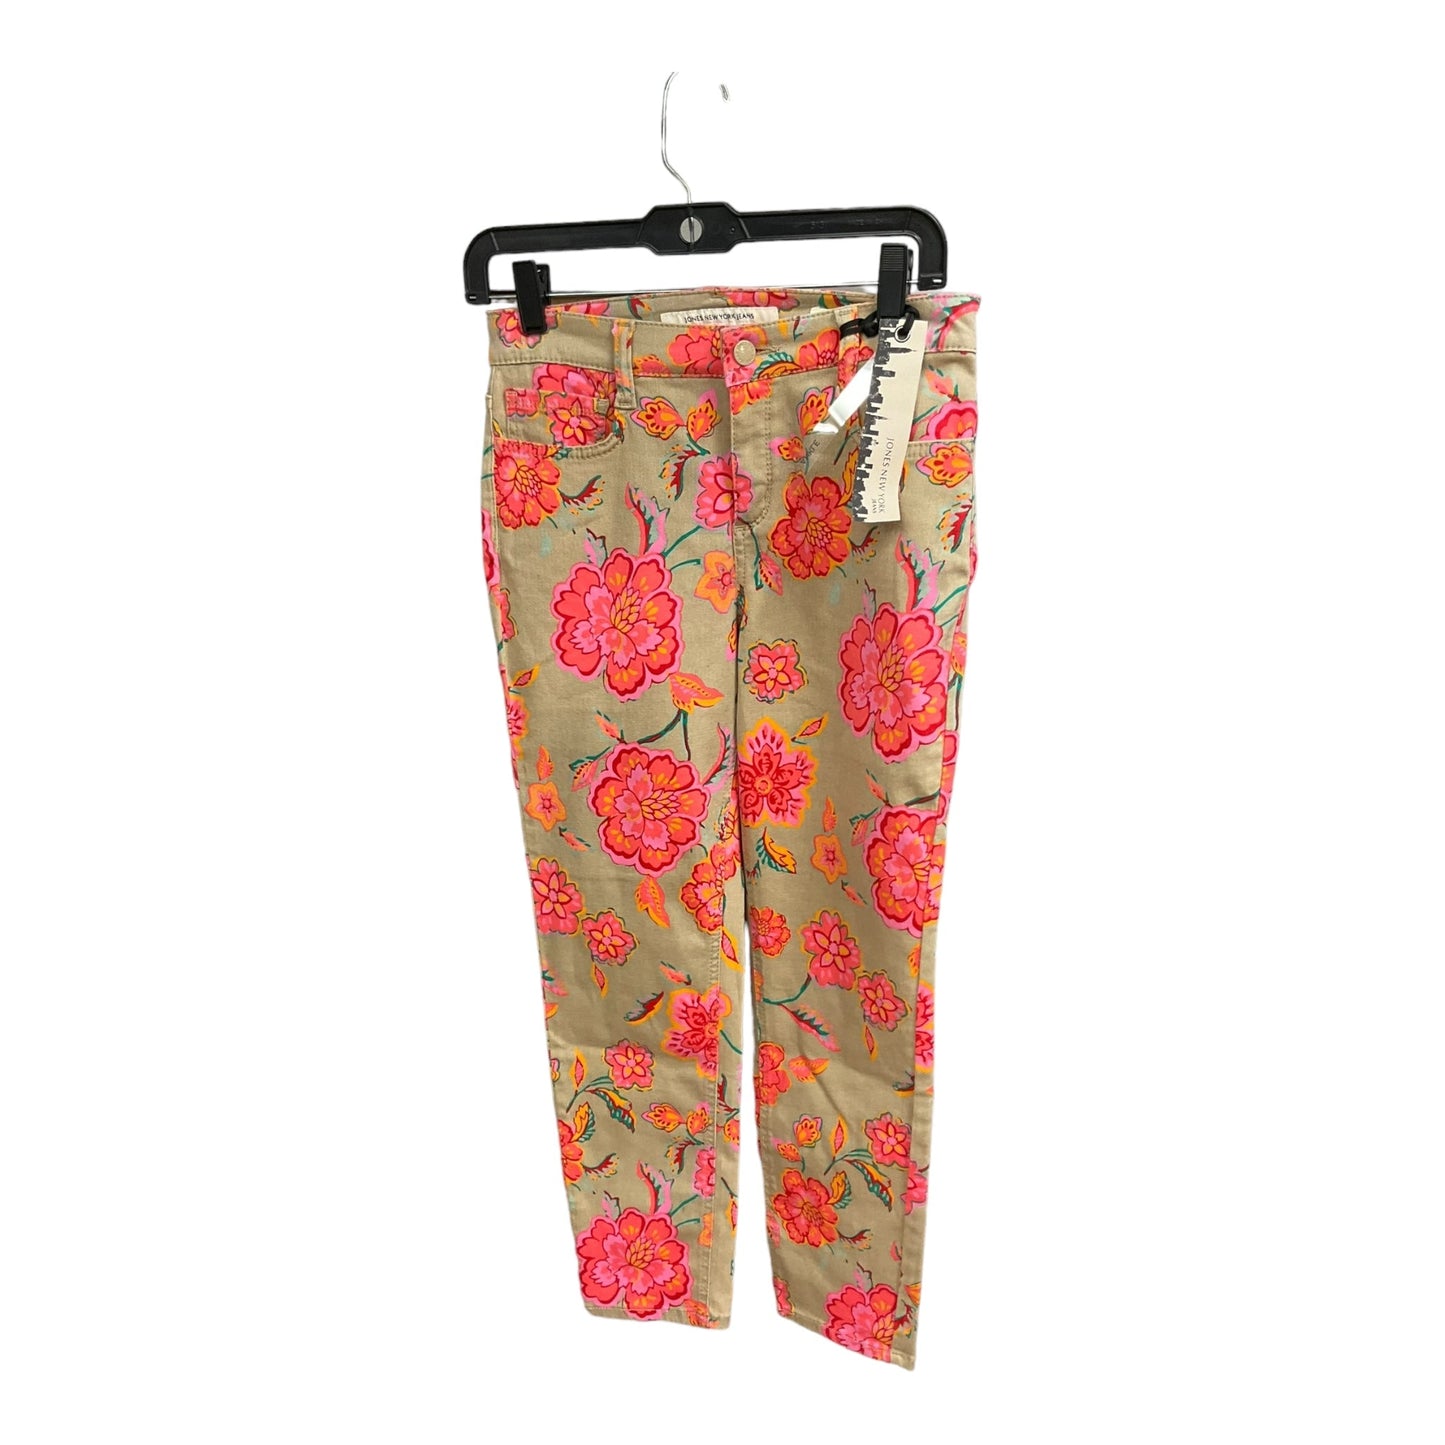 Floral Print Jeans Cropped Jones New York, Size 6